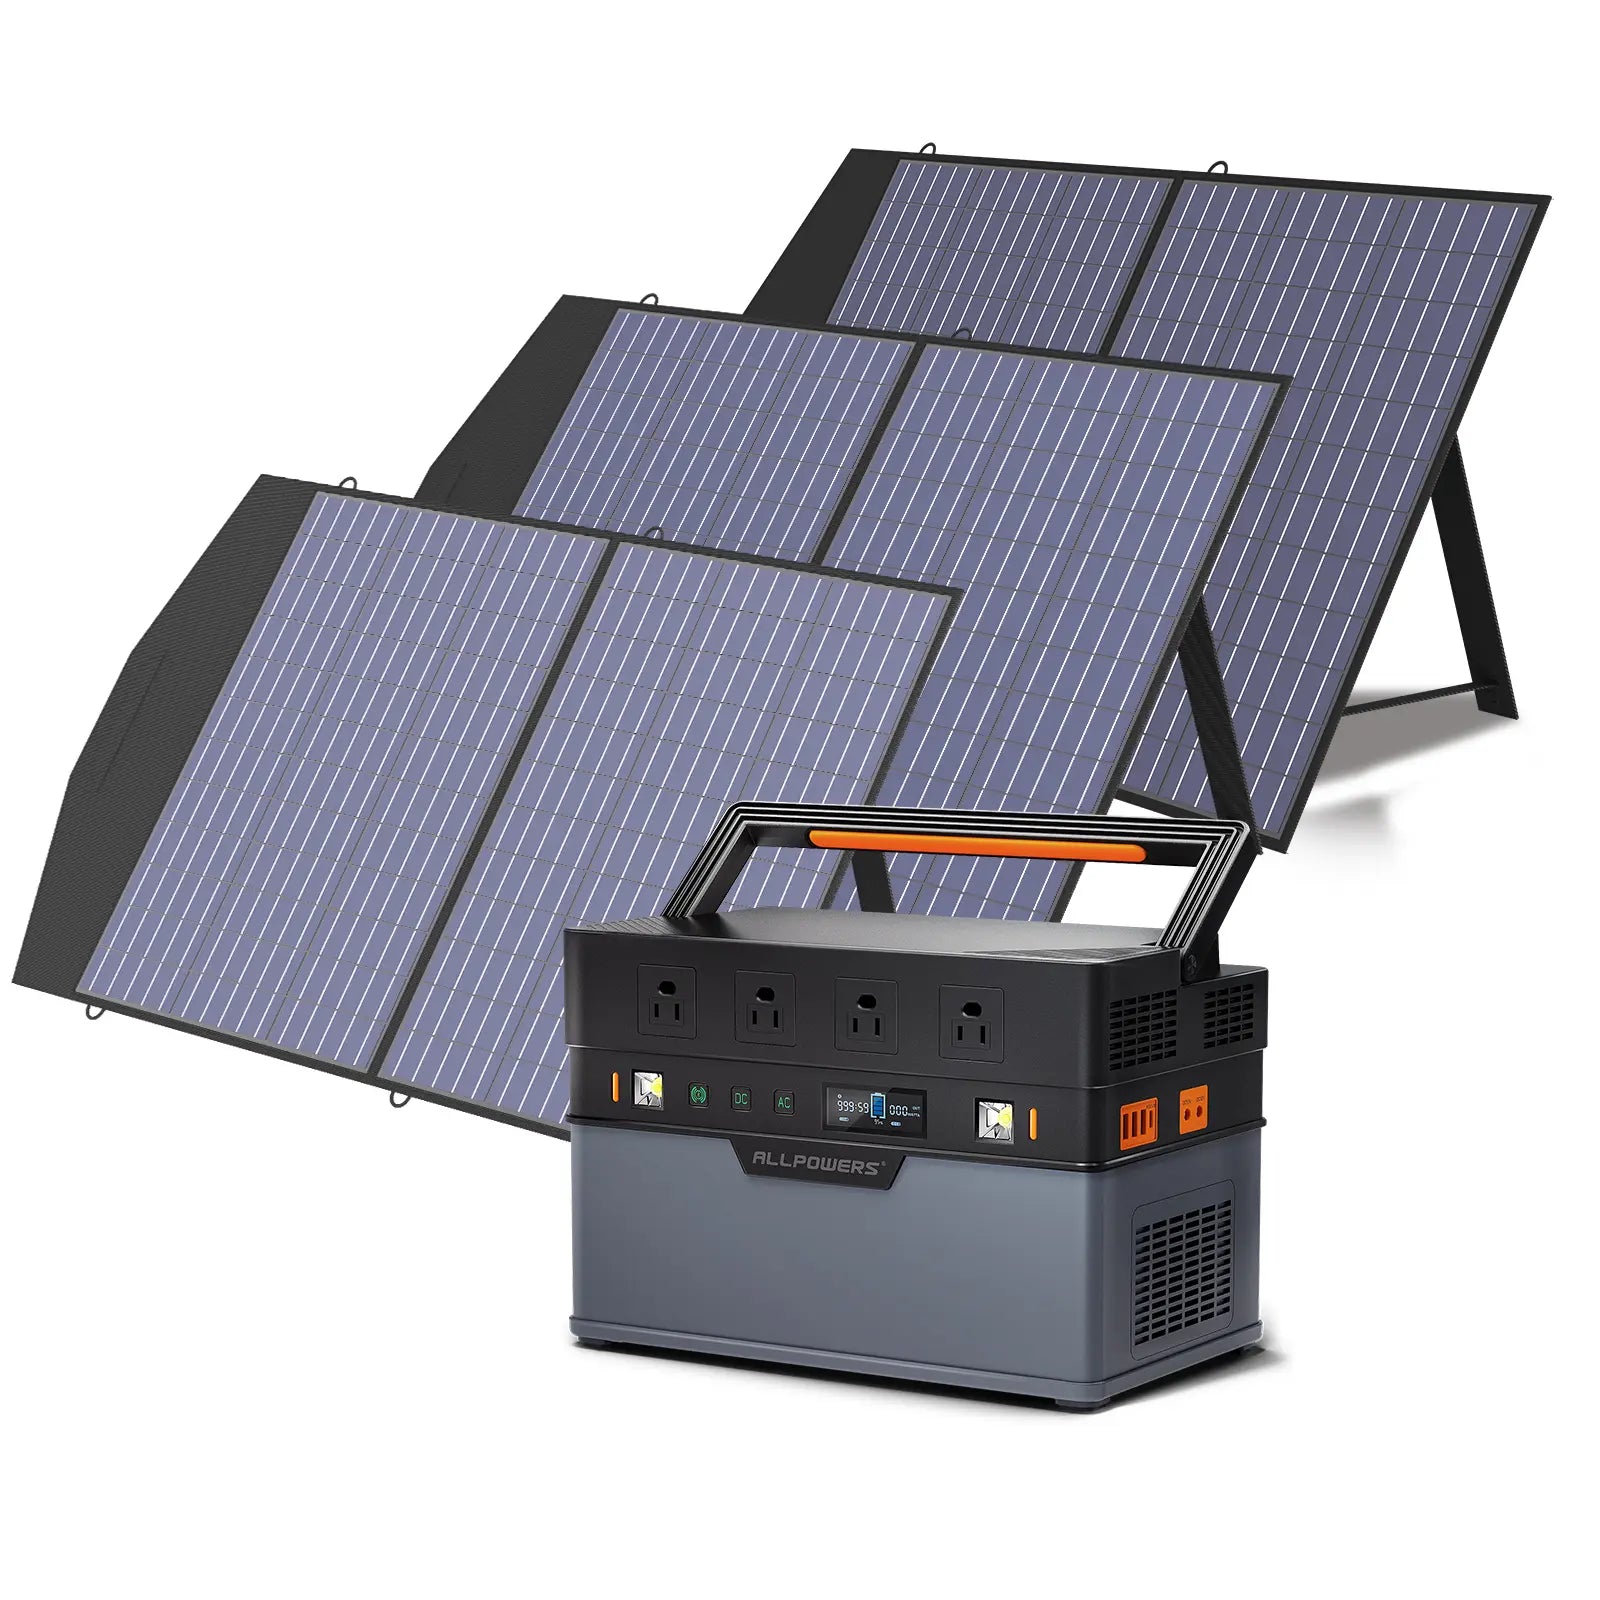 ALLPOWERS S1500 Portable Power Station 1500W 1092Wh (S1500 + 3 x SP027 100W Solar Panel)